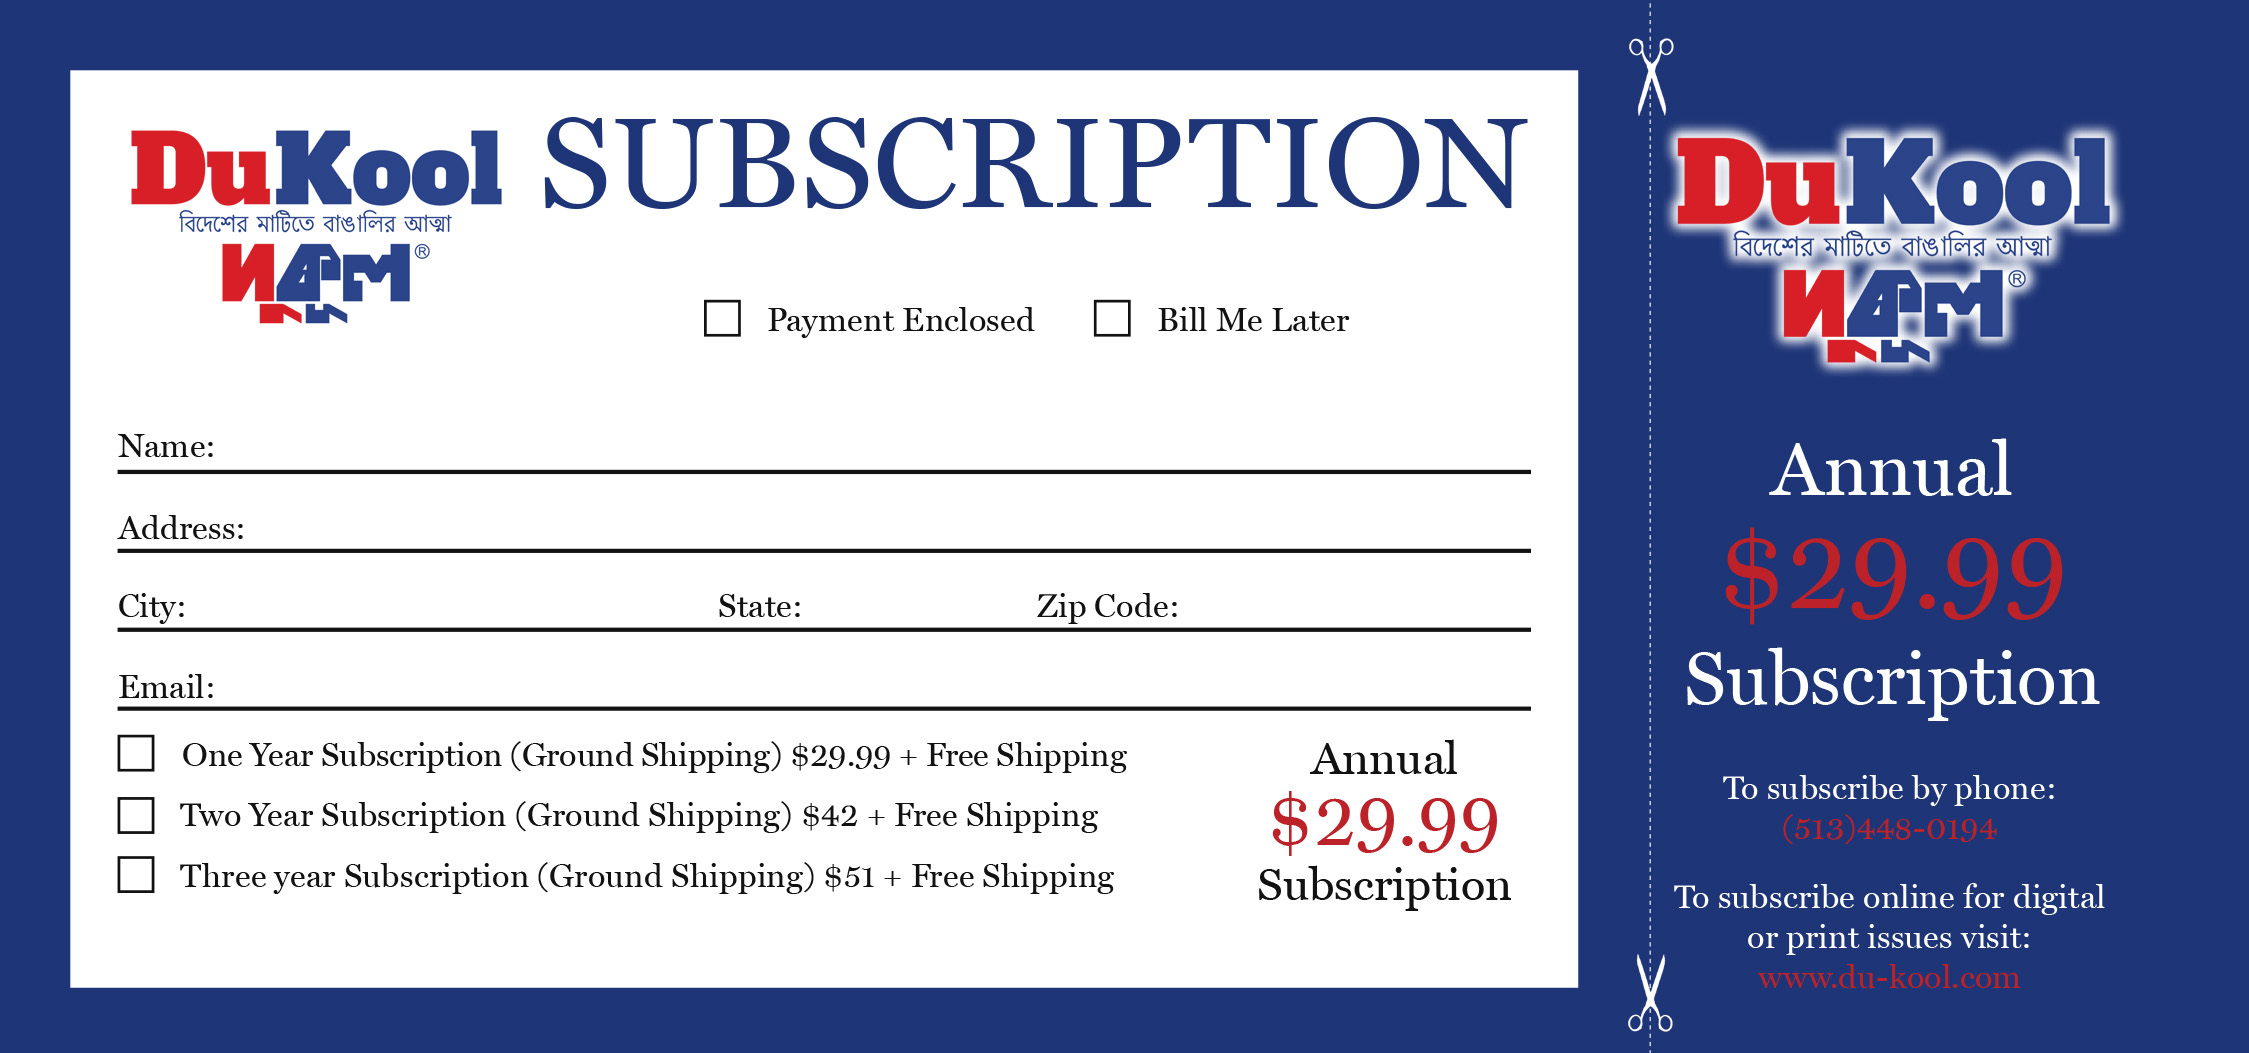 Magazine Subscription Card Template ] – How To Integrate Throughout Magazine Subscription Gift Certificate Template